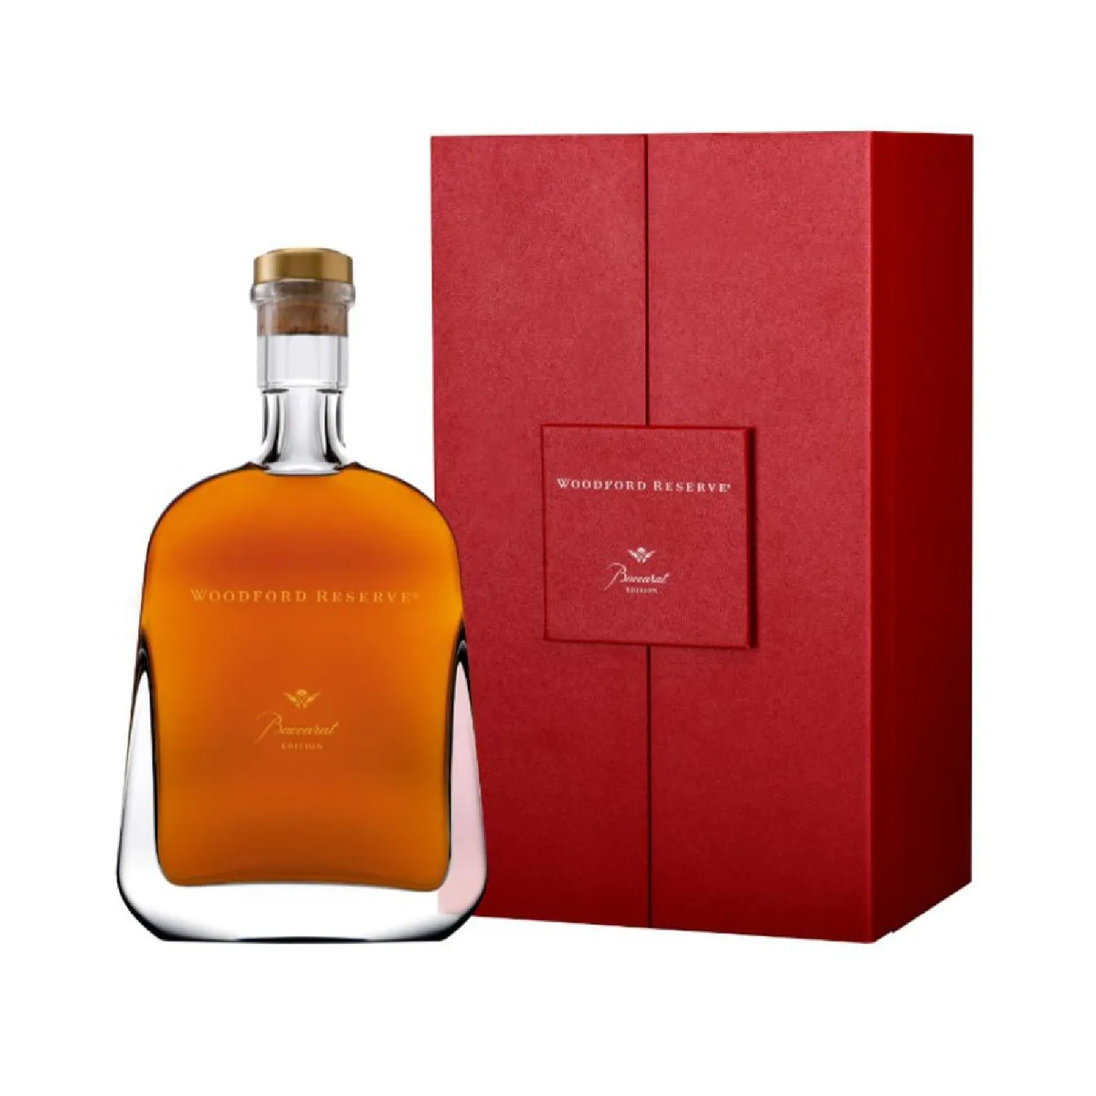 Woodford Reserve Baccarat Edition 700ml offers in Qantas